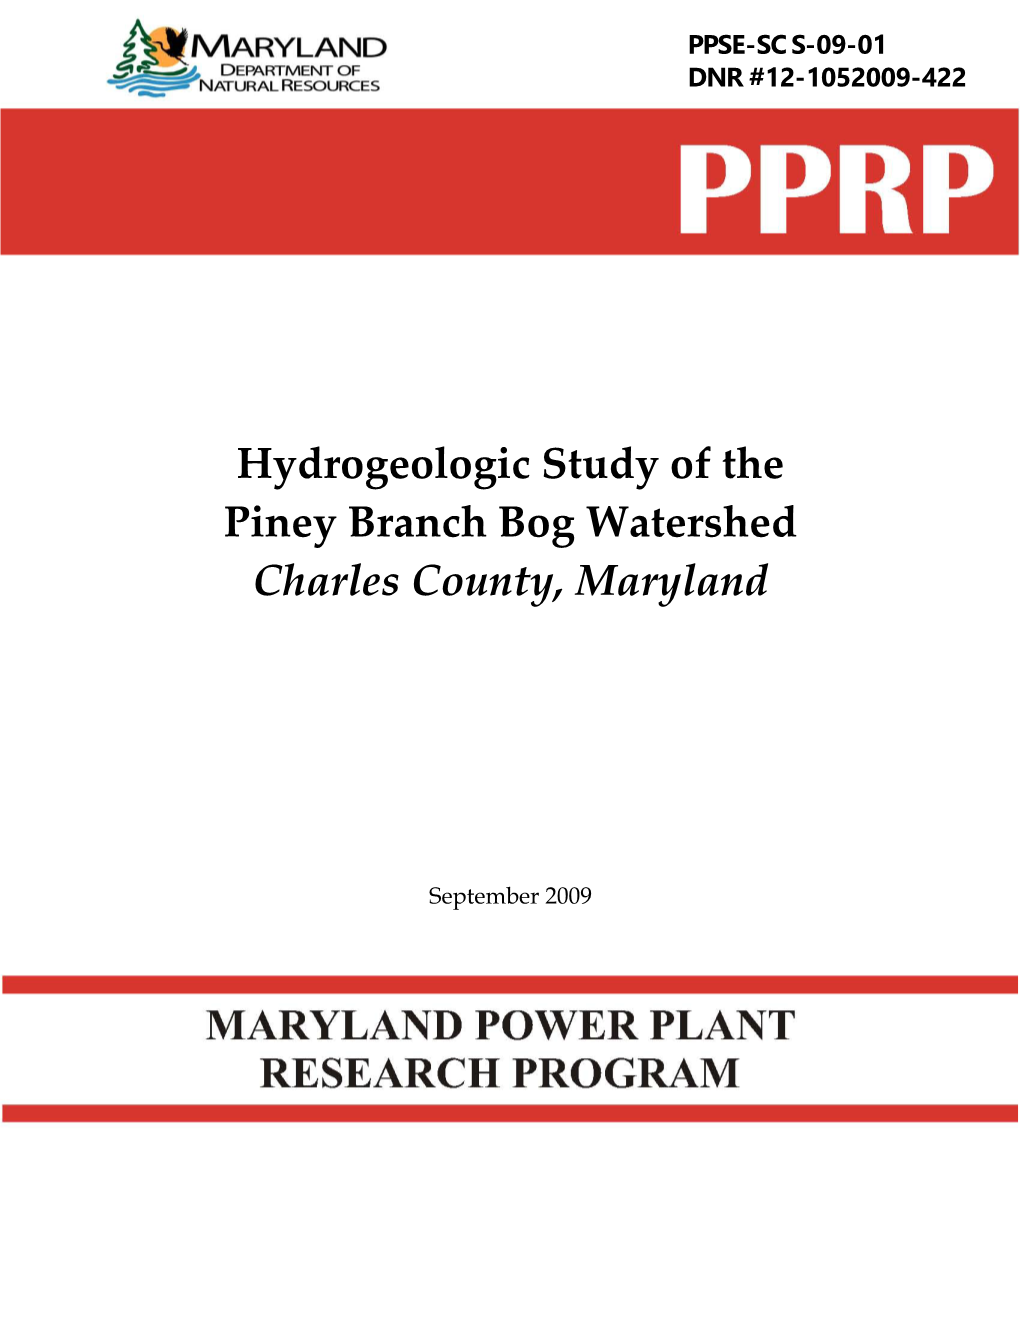 Hydrogeologic Study of the Piney Branch Bog Watershed Charles County, Maryland